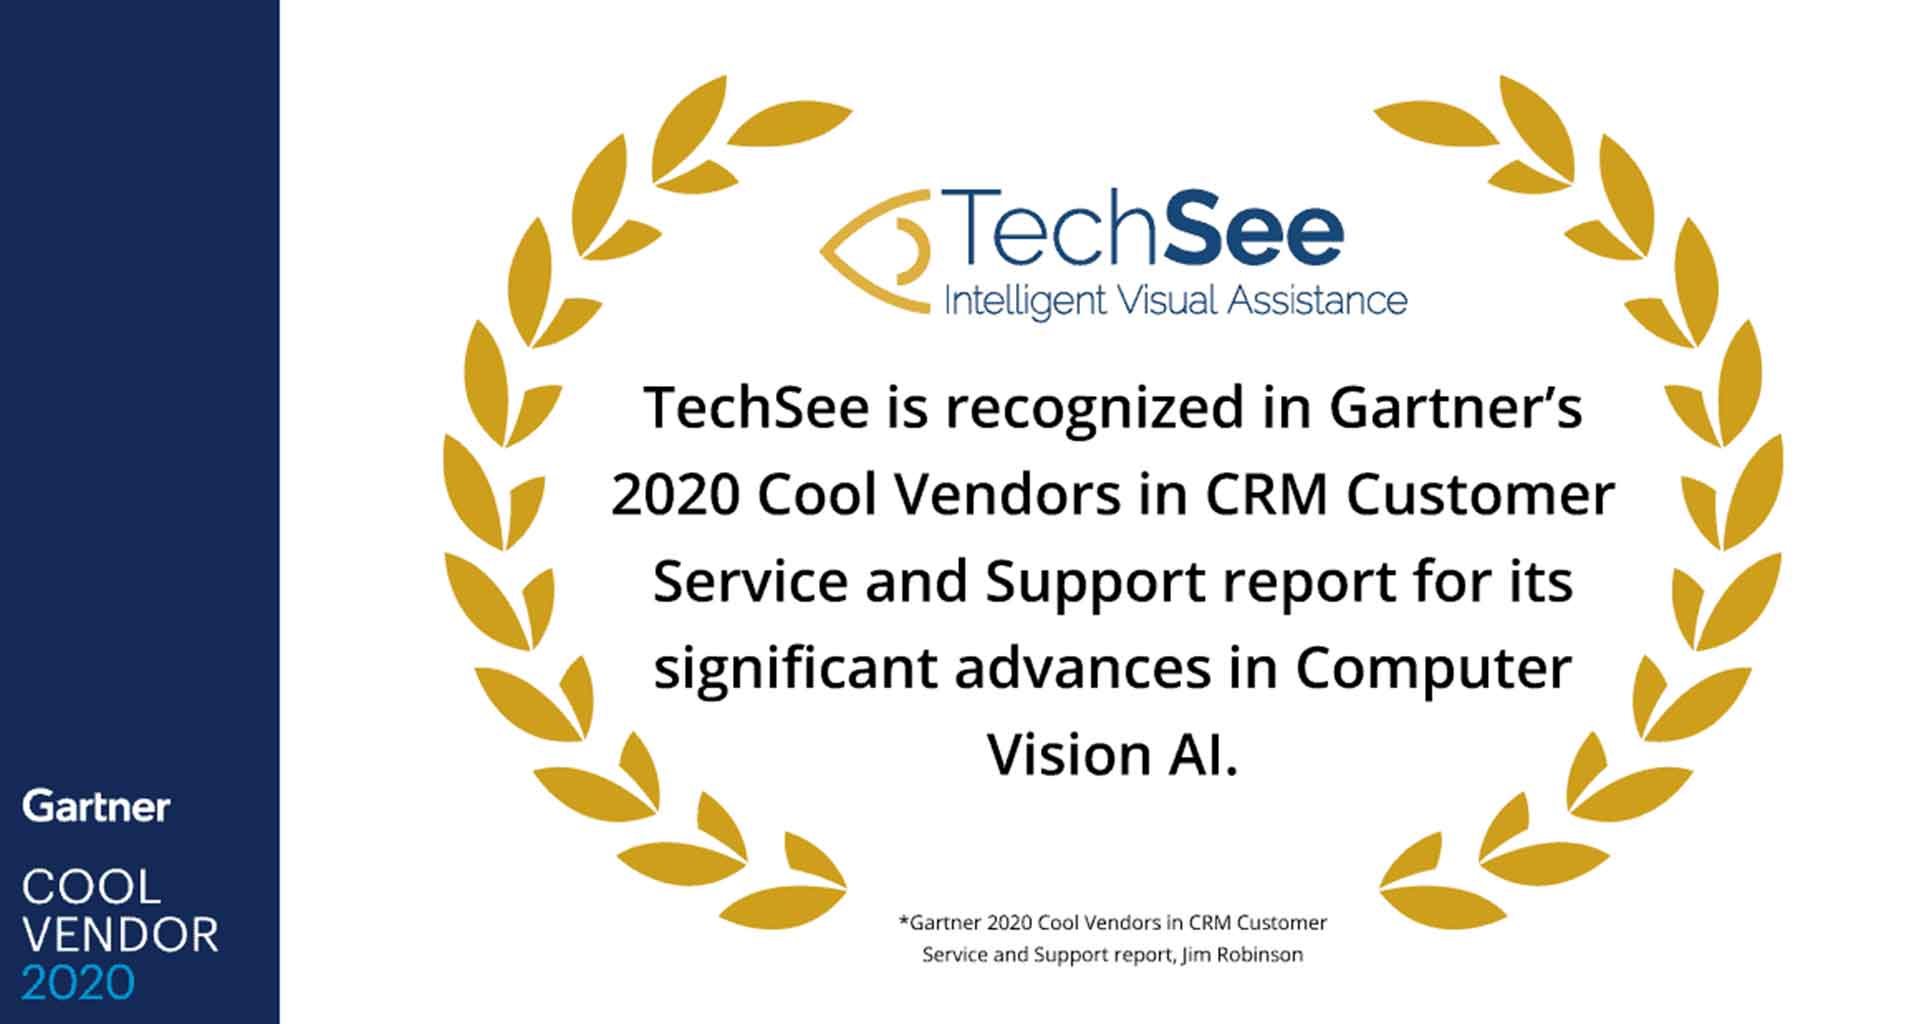 TechSee recognized in Gartner Cool Vendors for Computer Vision AI CRM Customer Service & Support 2020